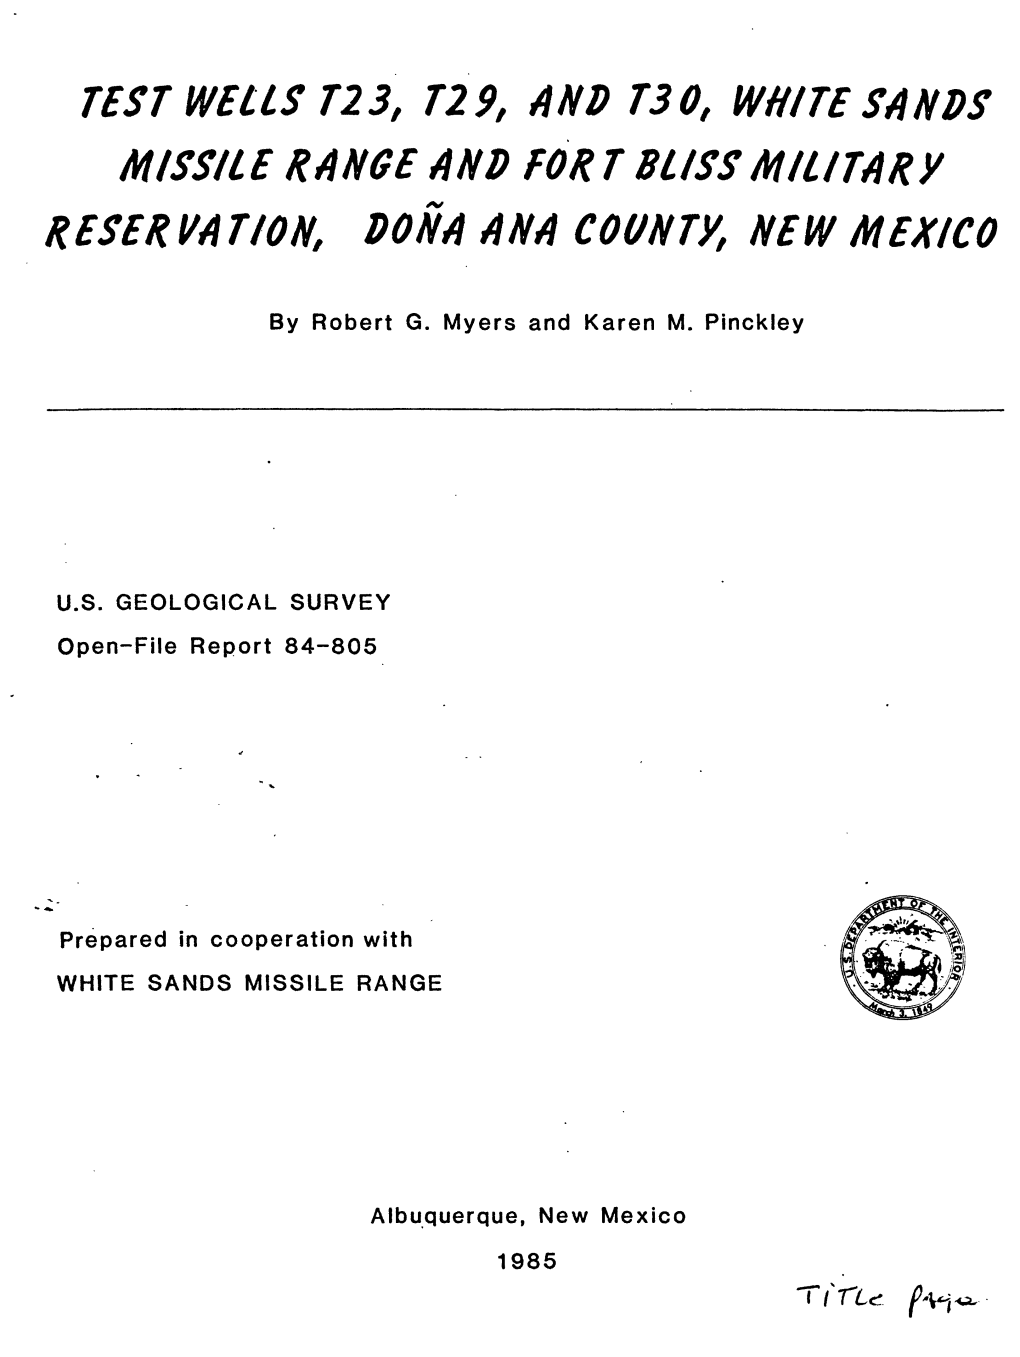 TEST WELLS T23, T29, and T30f WHITE SANDS MISSILE RANGE and FORT BLISS MILITARY RESERVATION, DONA ANA COUNTY, NEW MEXICO